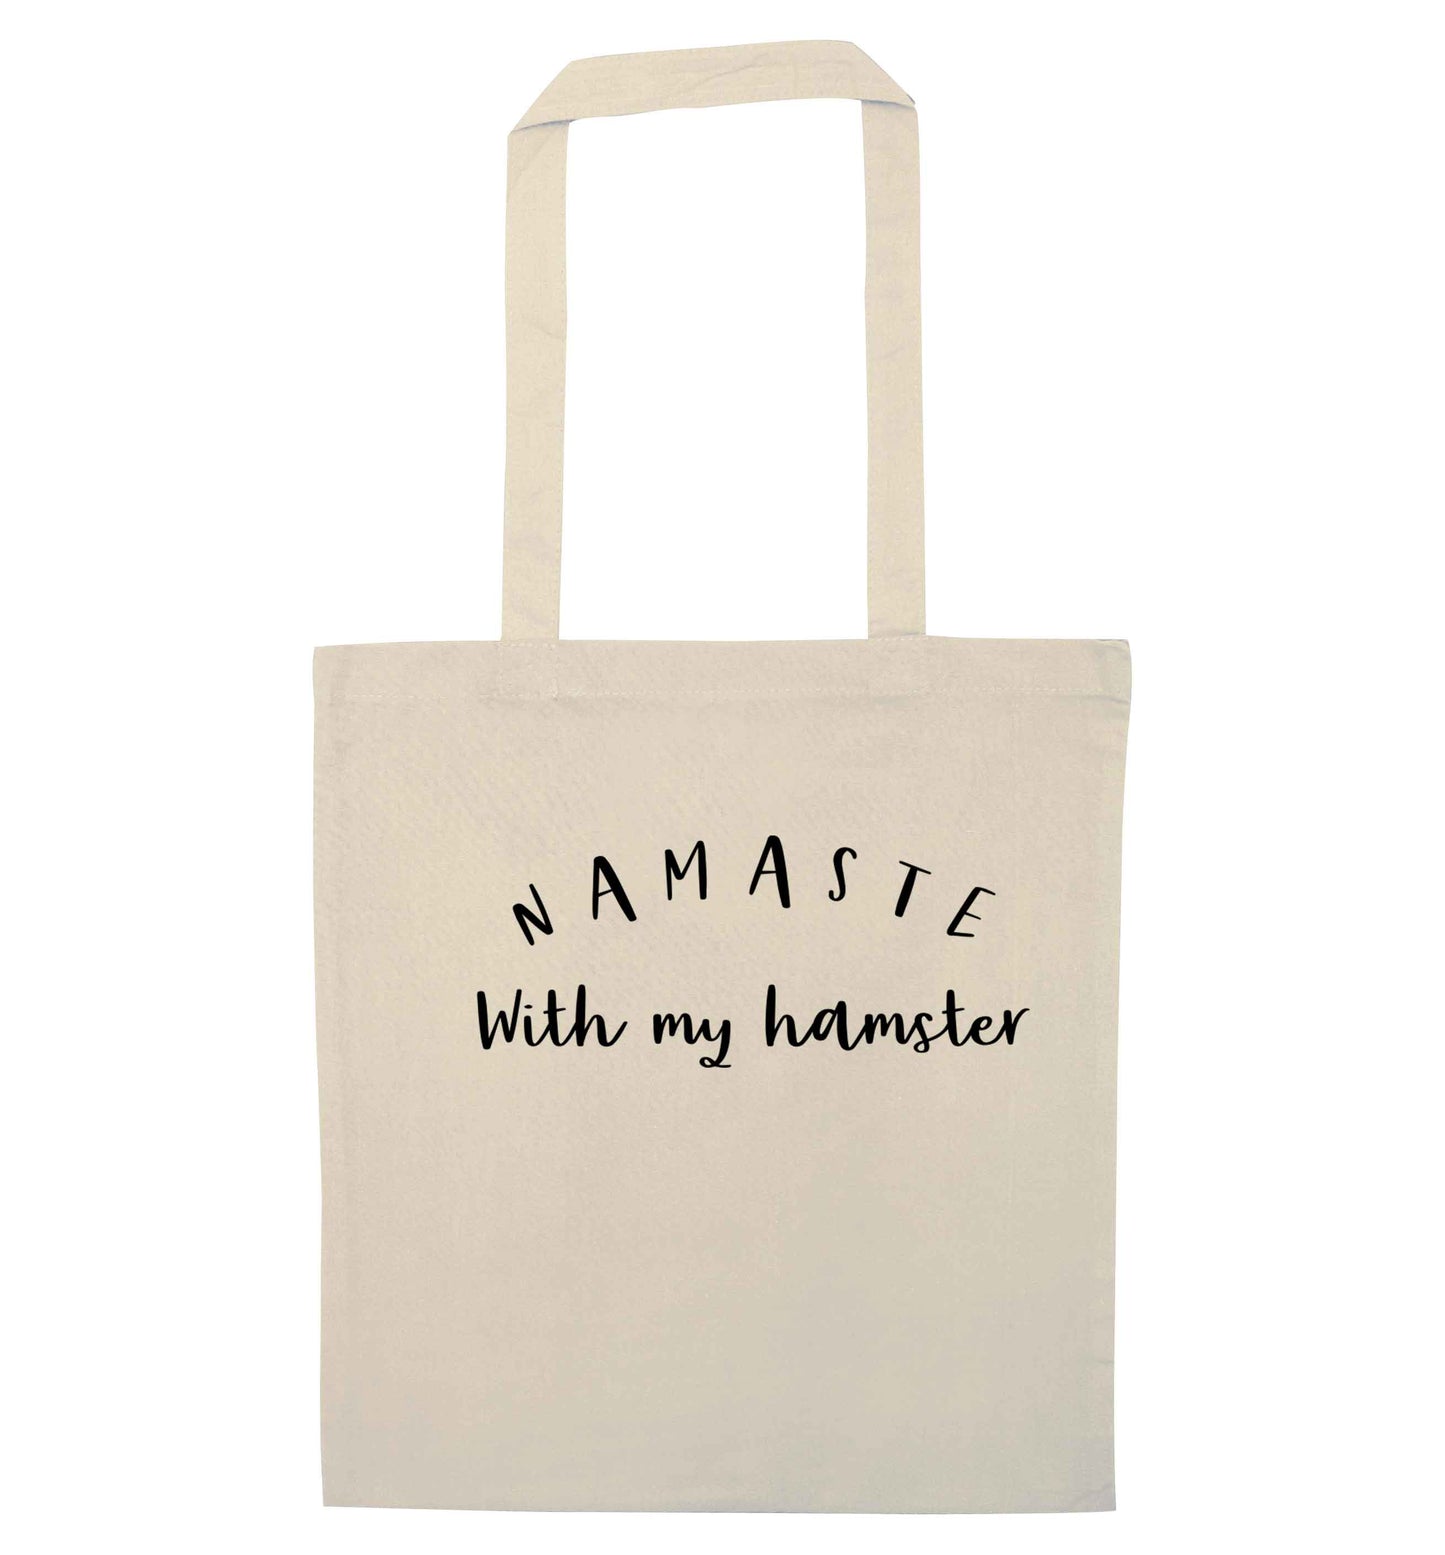 Namaste with my hamster natural tote bag